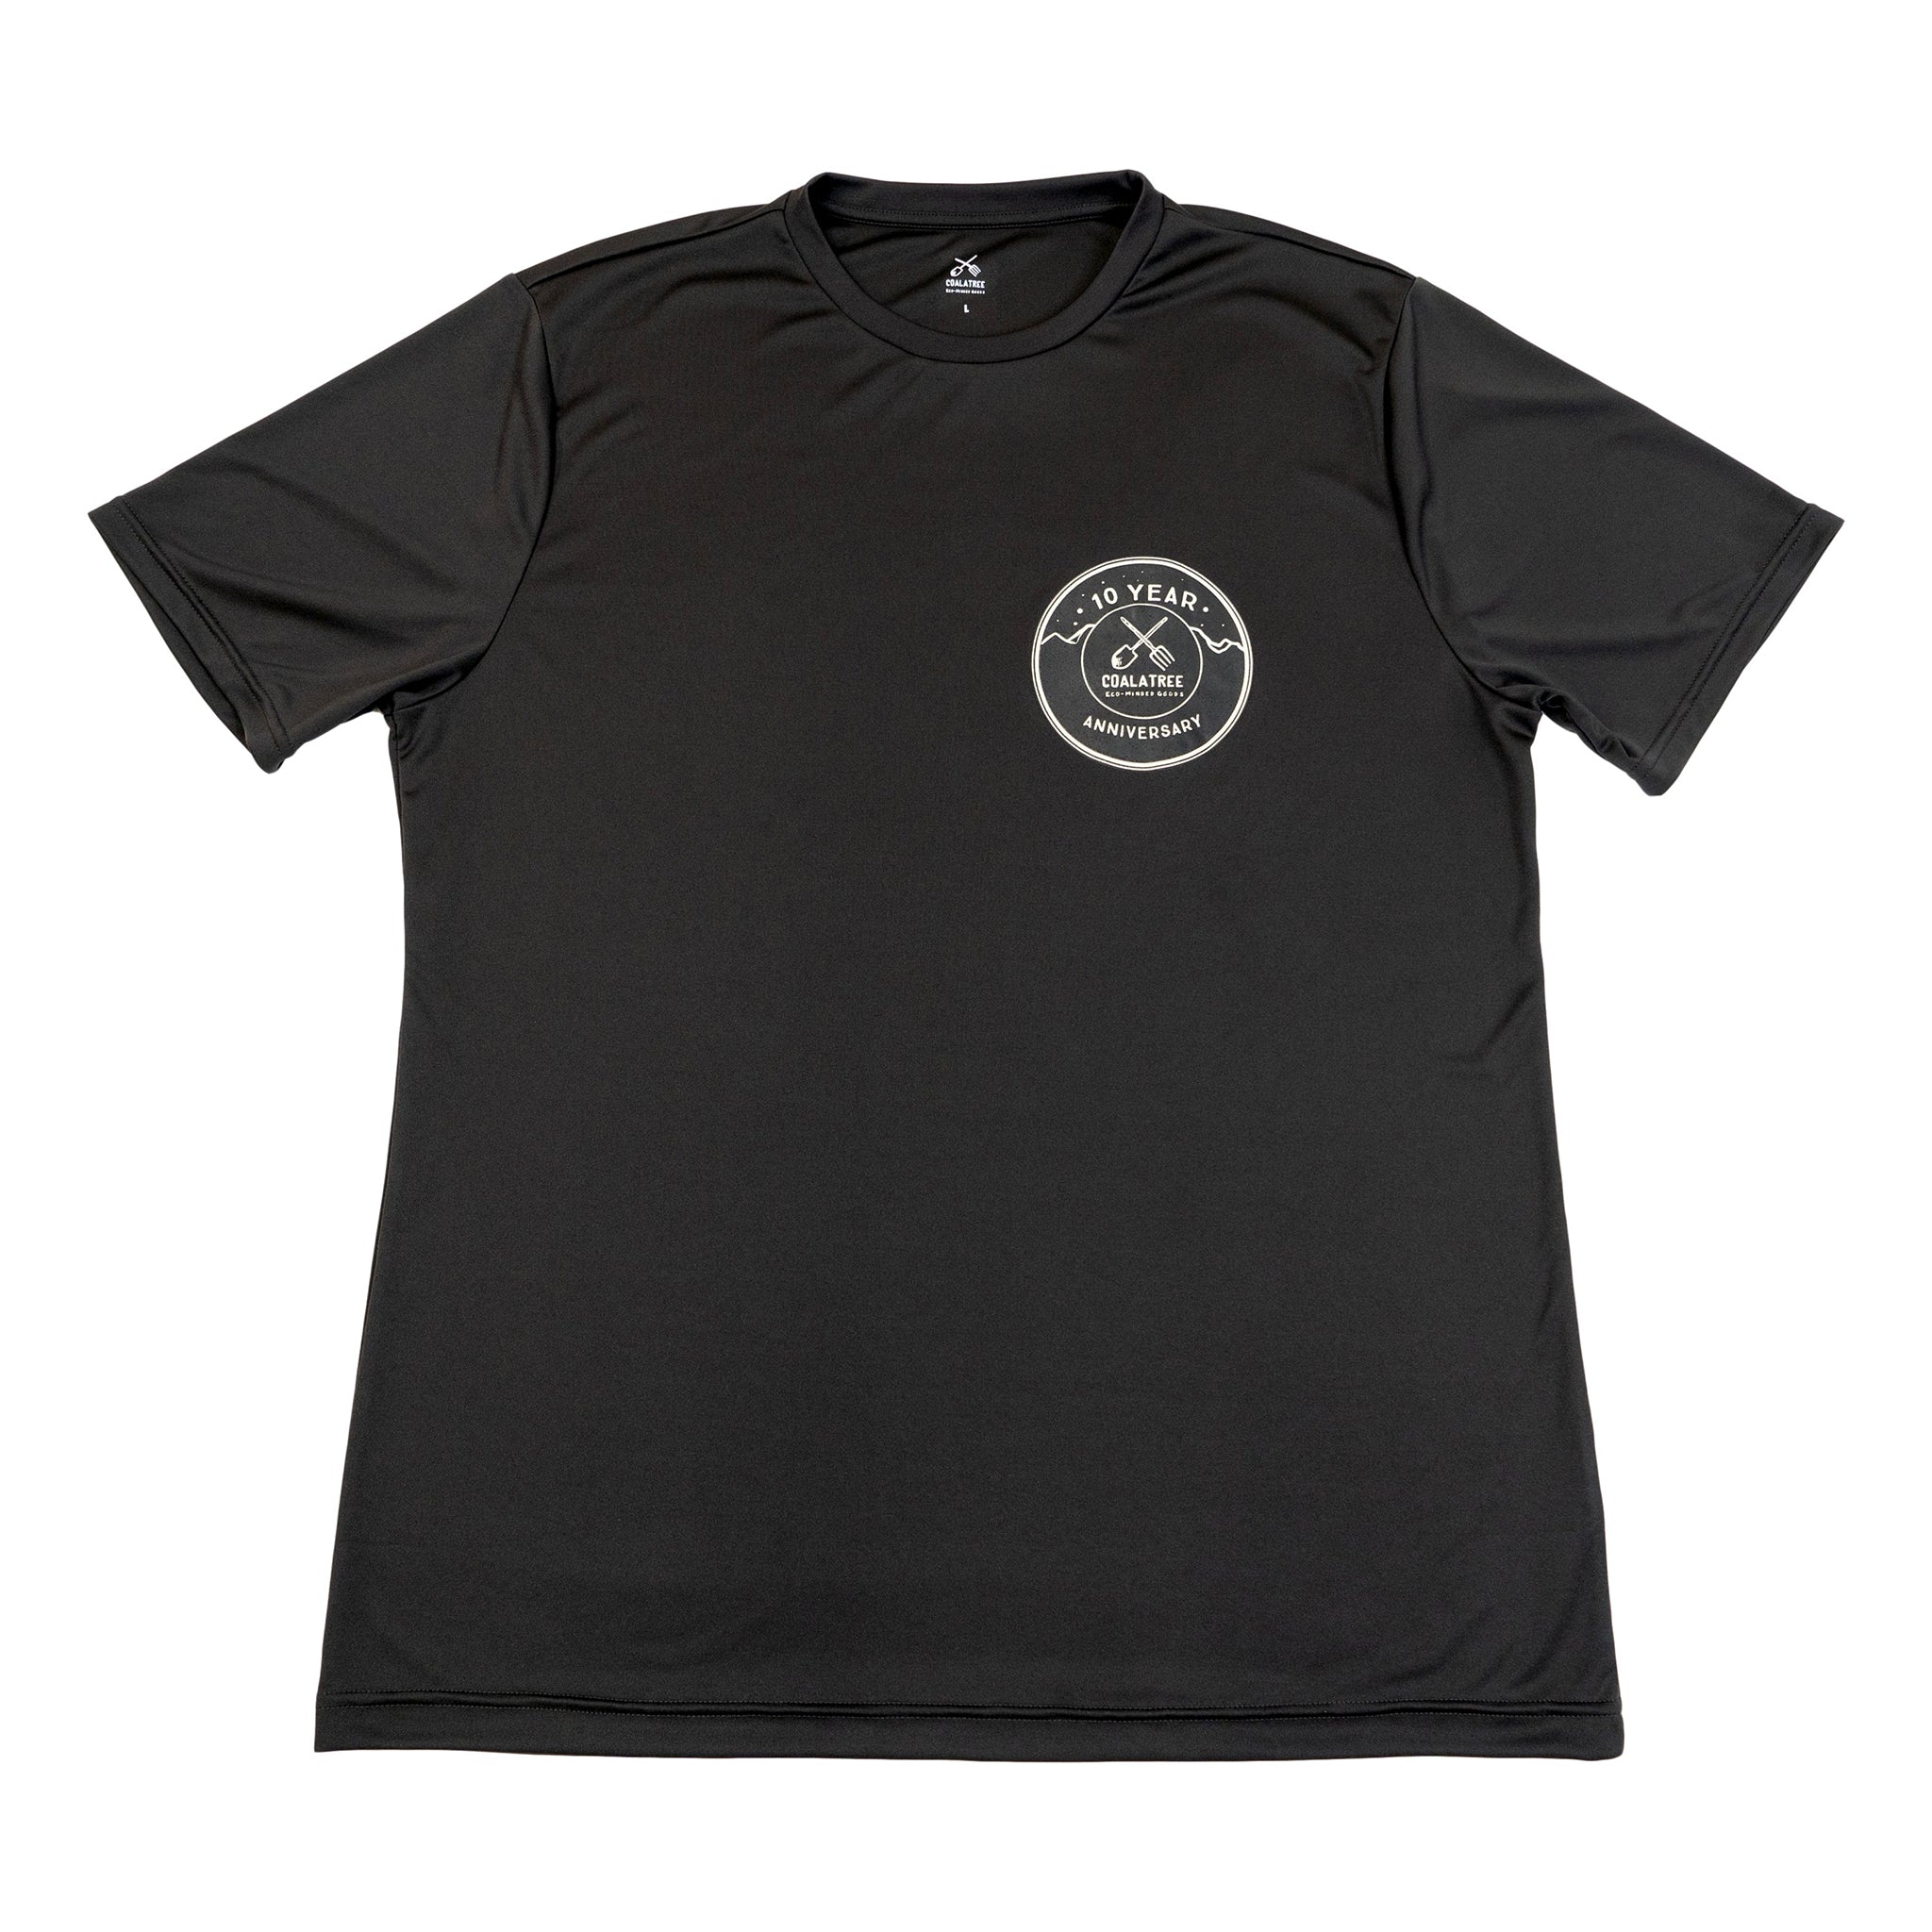 Experience Unmatched Durability with Our 10-Year Quick-Dry Tee